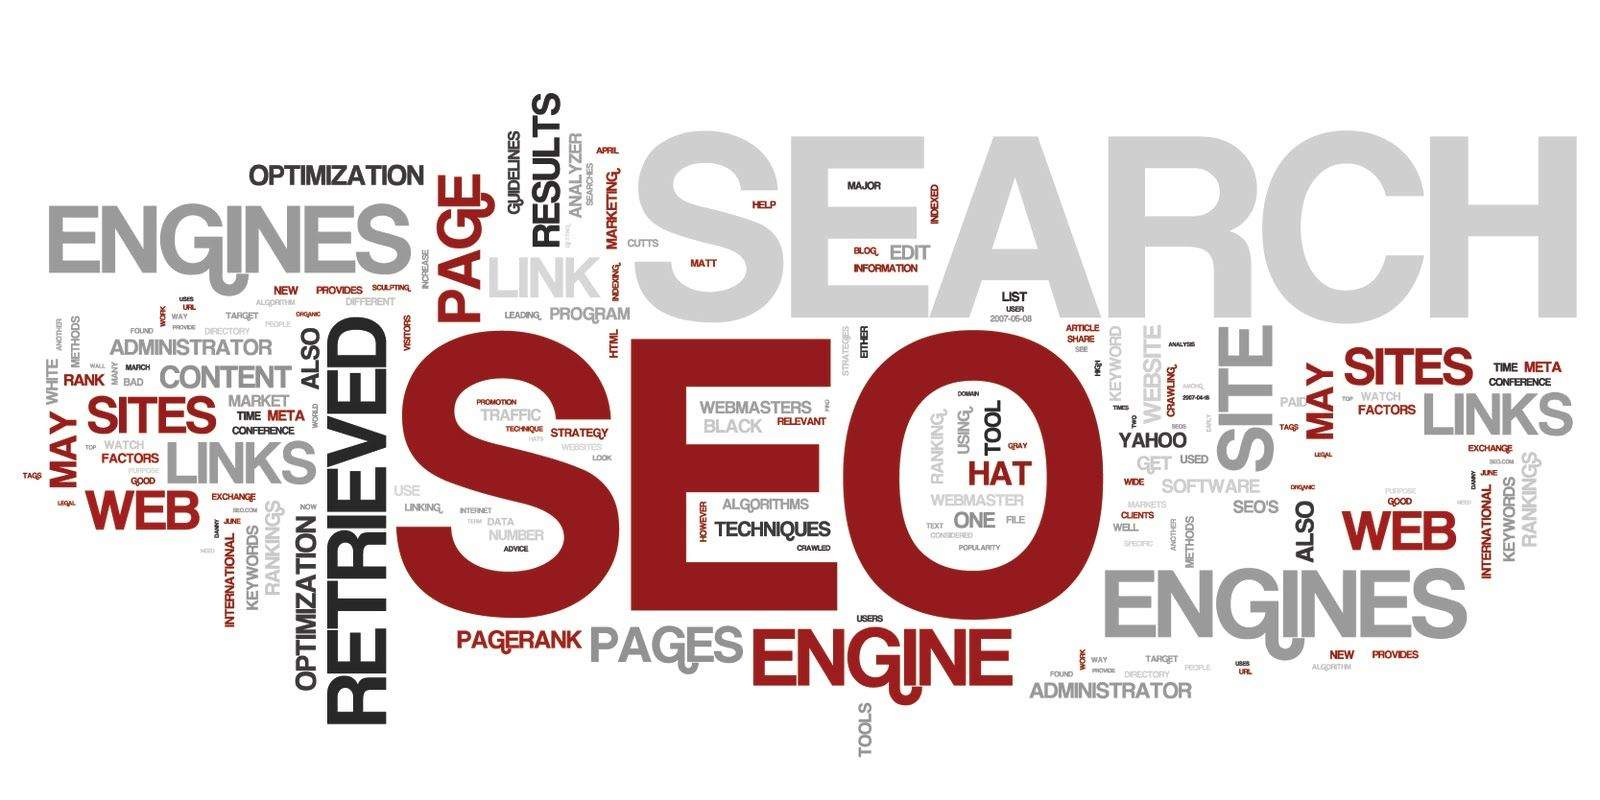 Learn everything important about Search Engine Optimization (SEO)